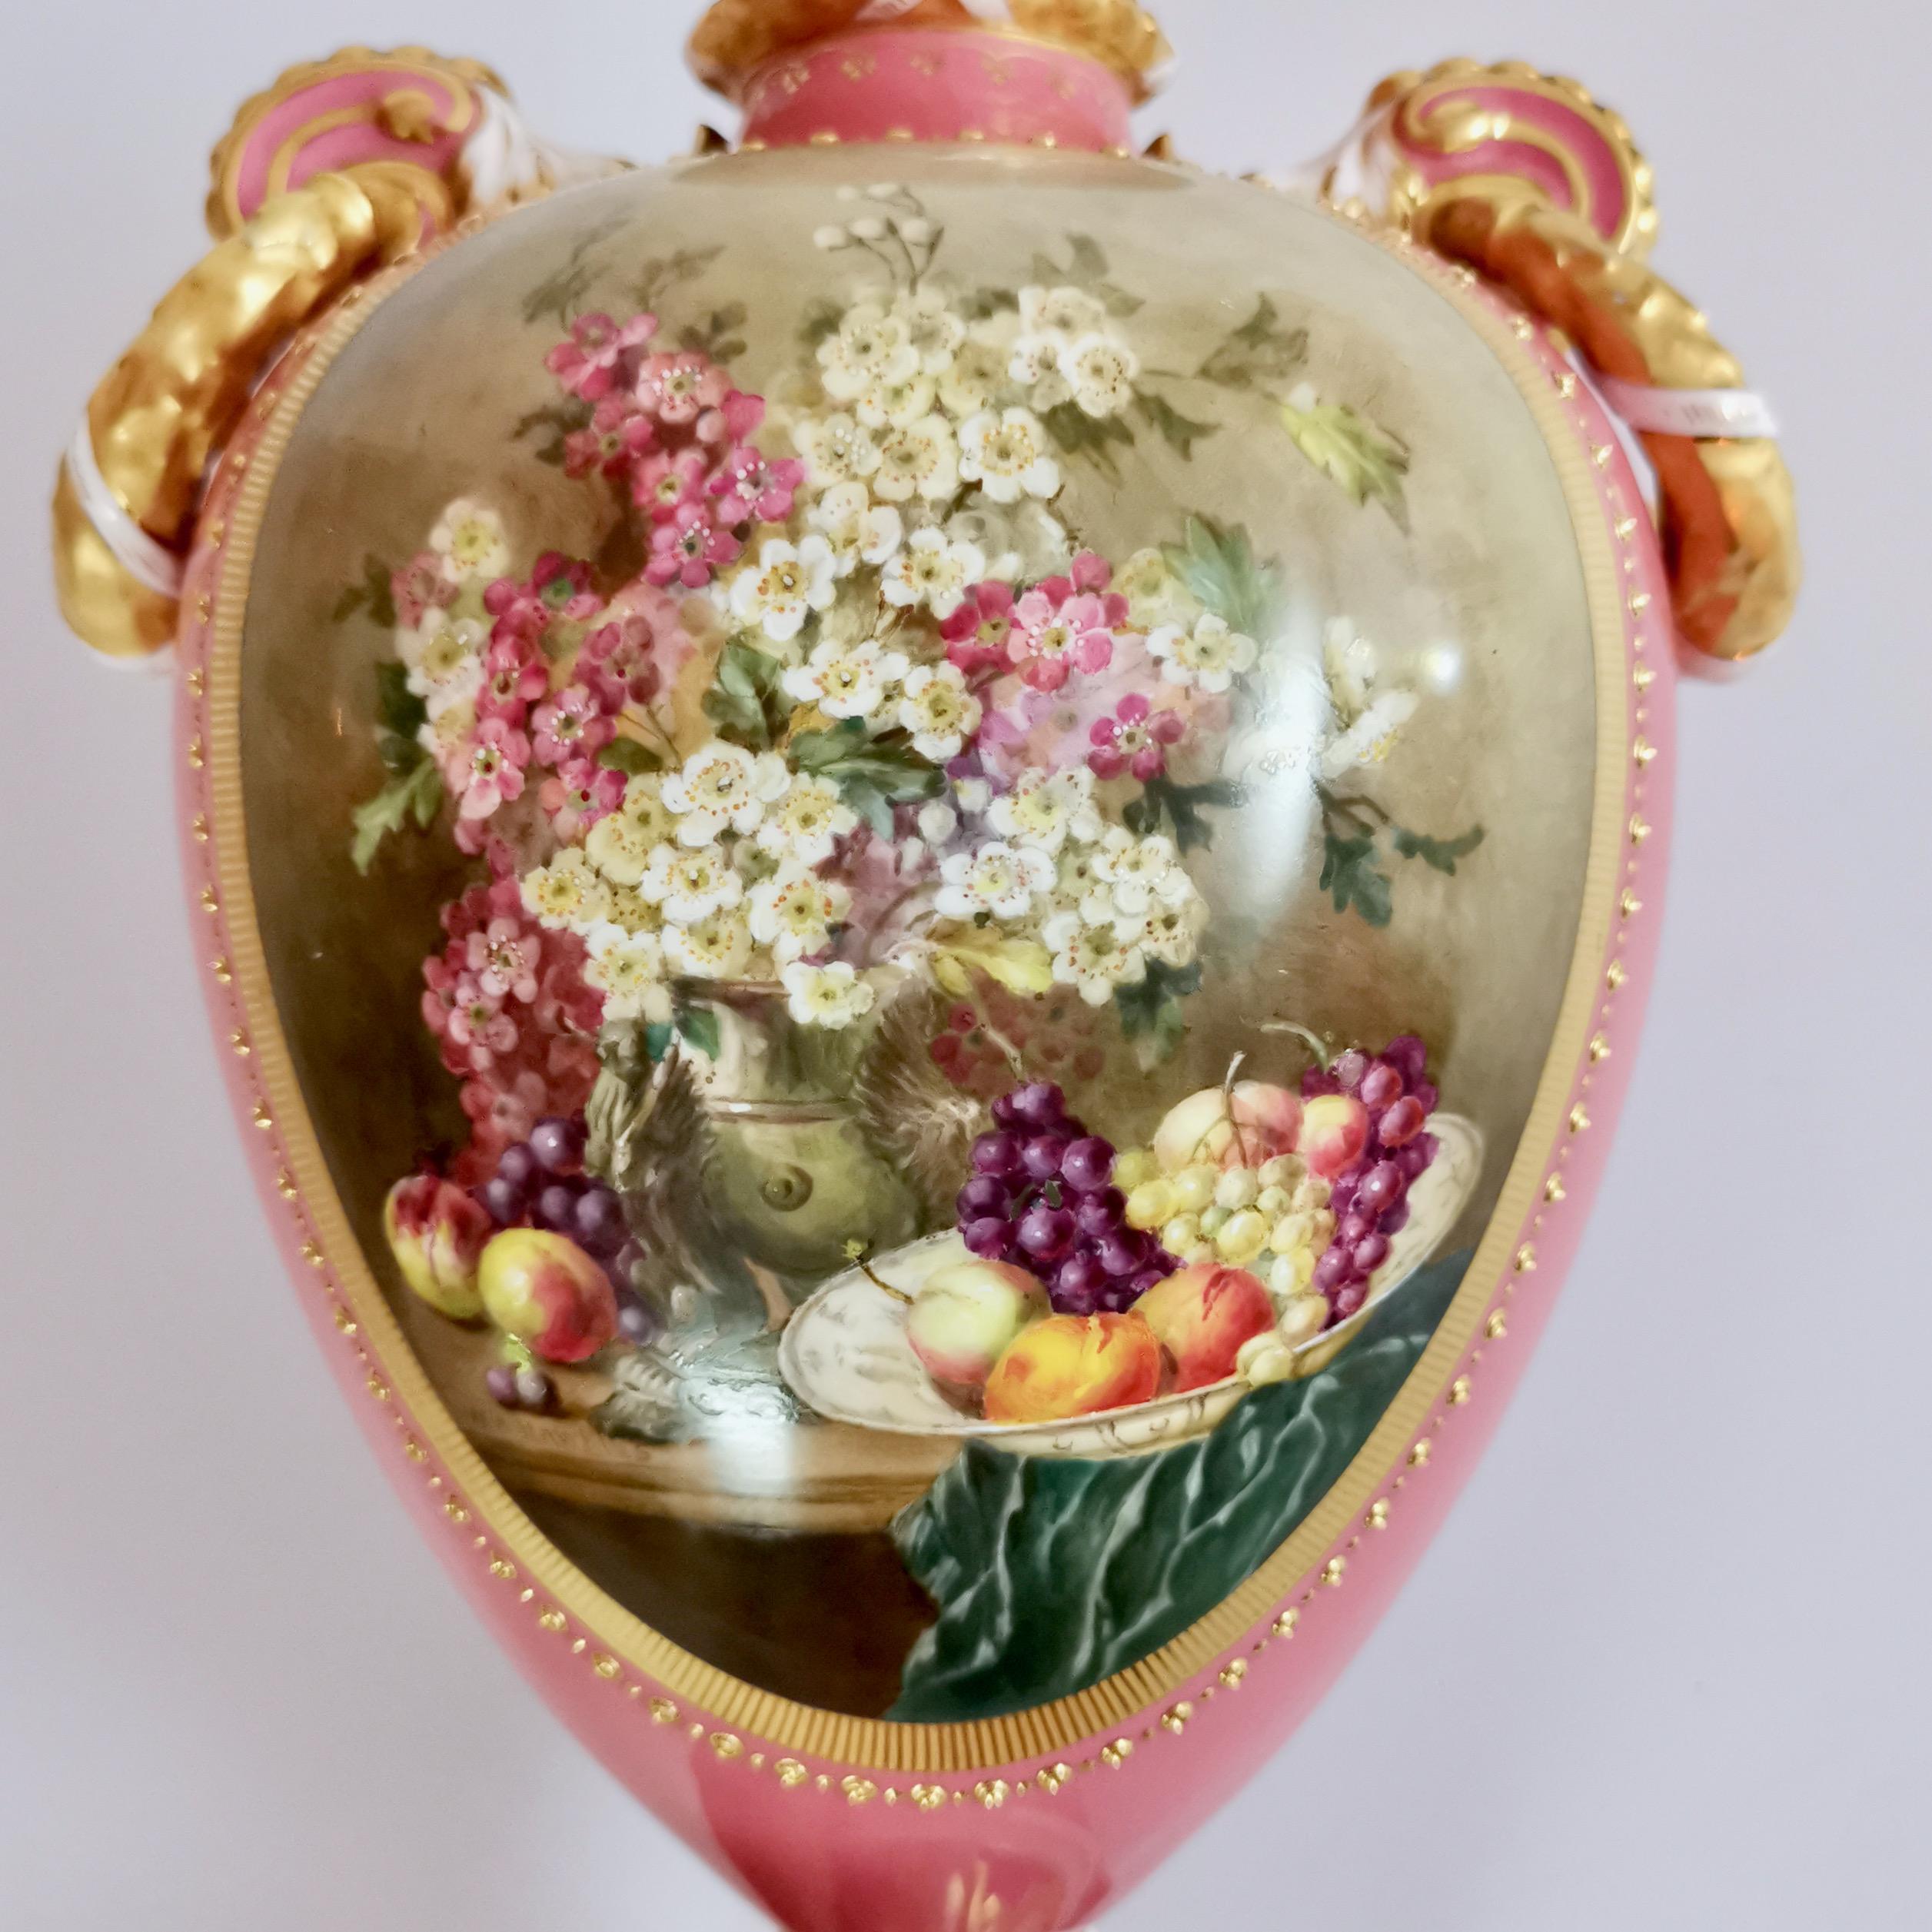 This is a stunning vase made by Royal Worcester in 1917, painted with flowers and fruits and signed by the famous porcelain artist William Hawkins.
 
The original Worcester factory was founded in the mid 18th Century and belongs to the group of